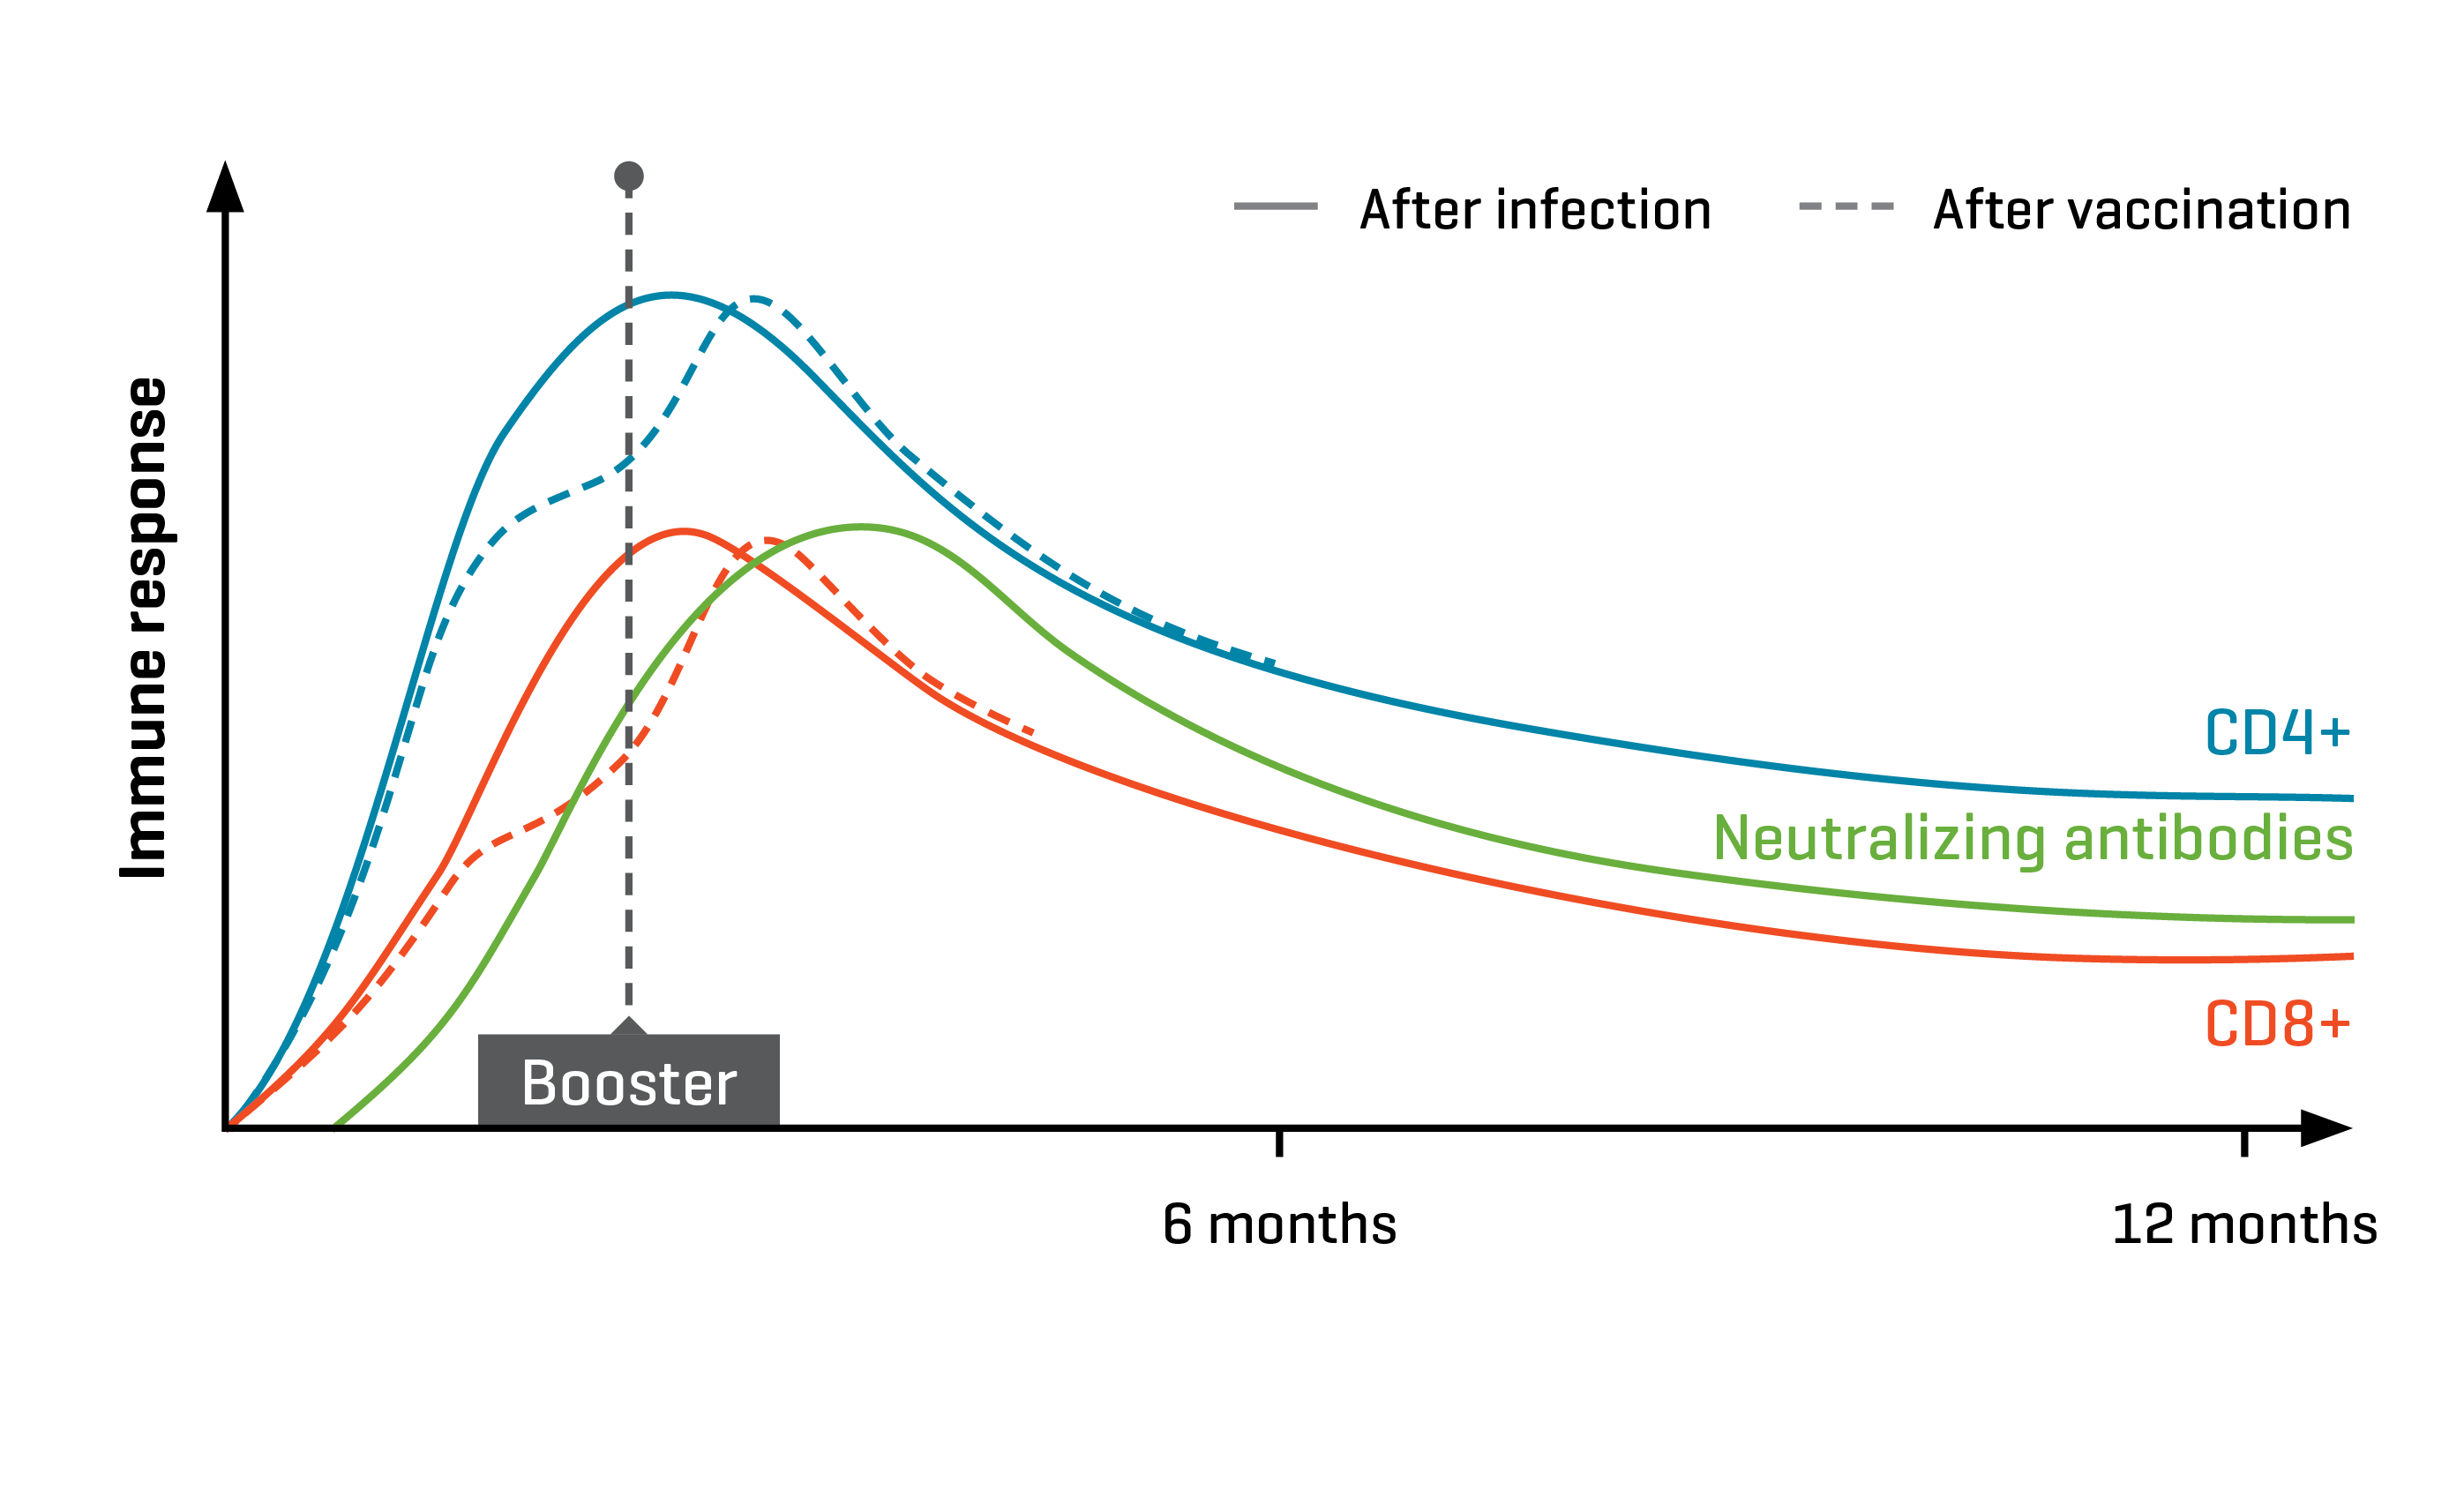 Figure 3. Schematic diagram illustrating how antigen-specific MHC Dextramer® reagents can be used to monitor the presence and frequency of tumor-specific T cells in patients participating in clinical trials as part of long-term immune monitoring after vaccination. This may help to understand the durability of the immune response and the impact of booster vaccinations.